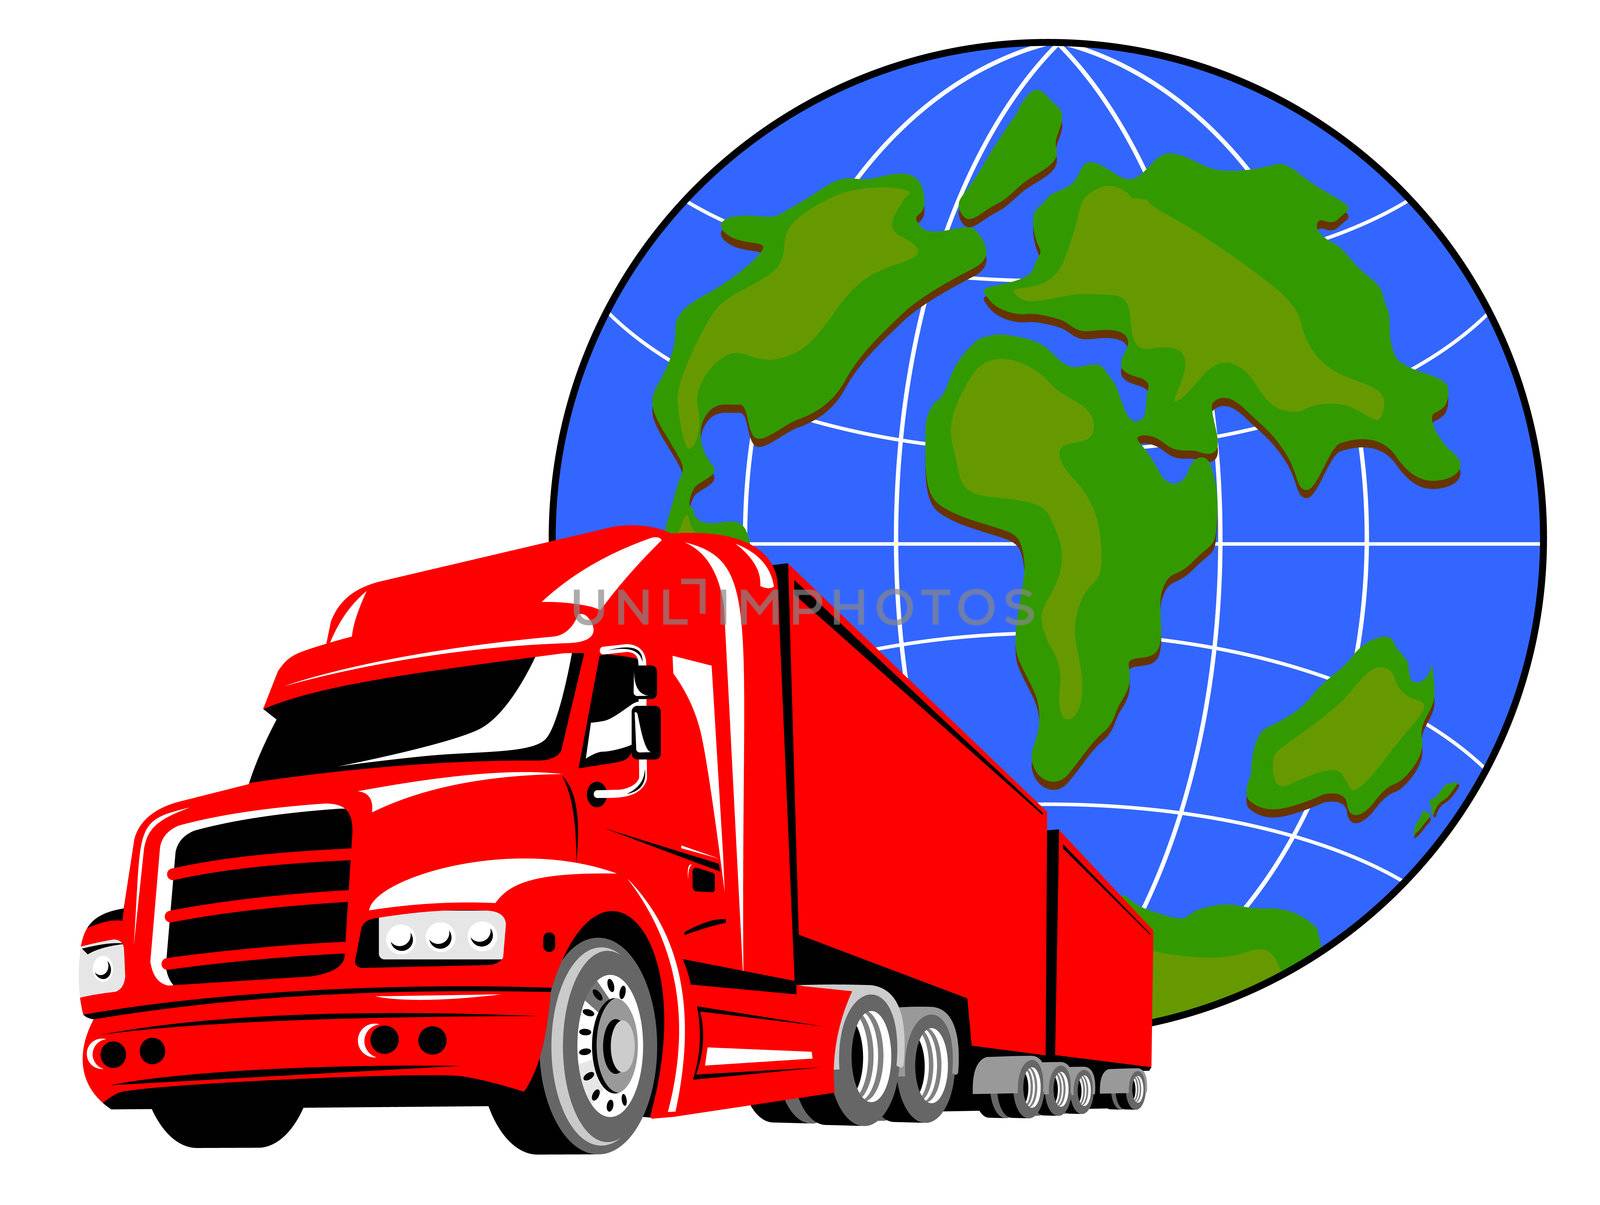 illustration of a container truck lorry done in retro style on isolated background with globe 